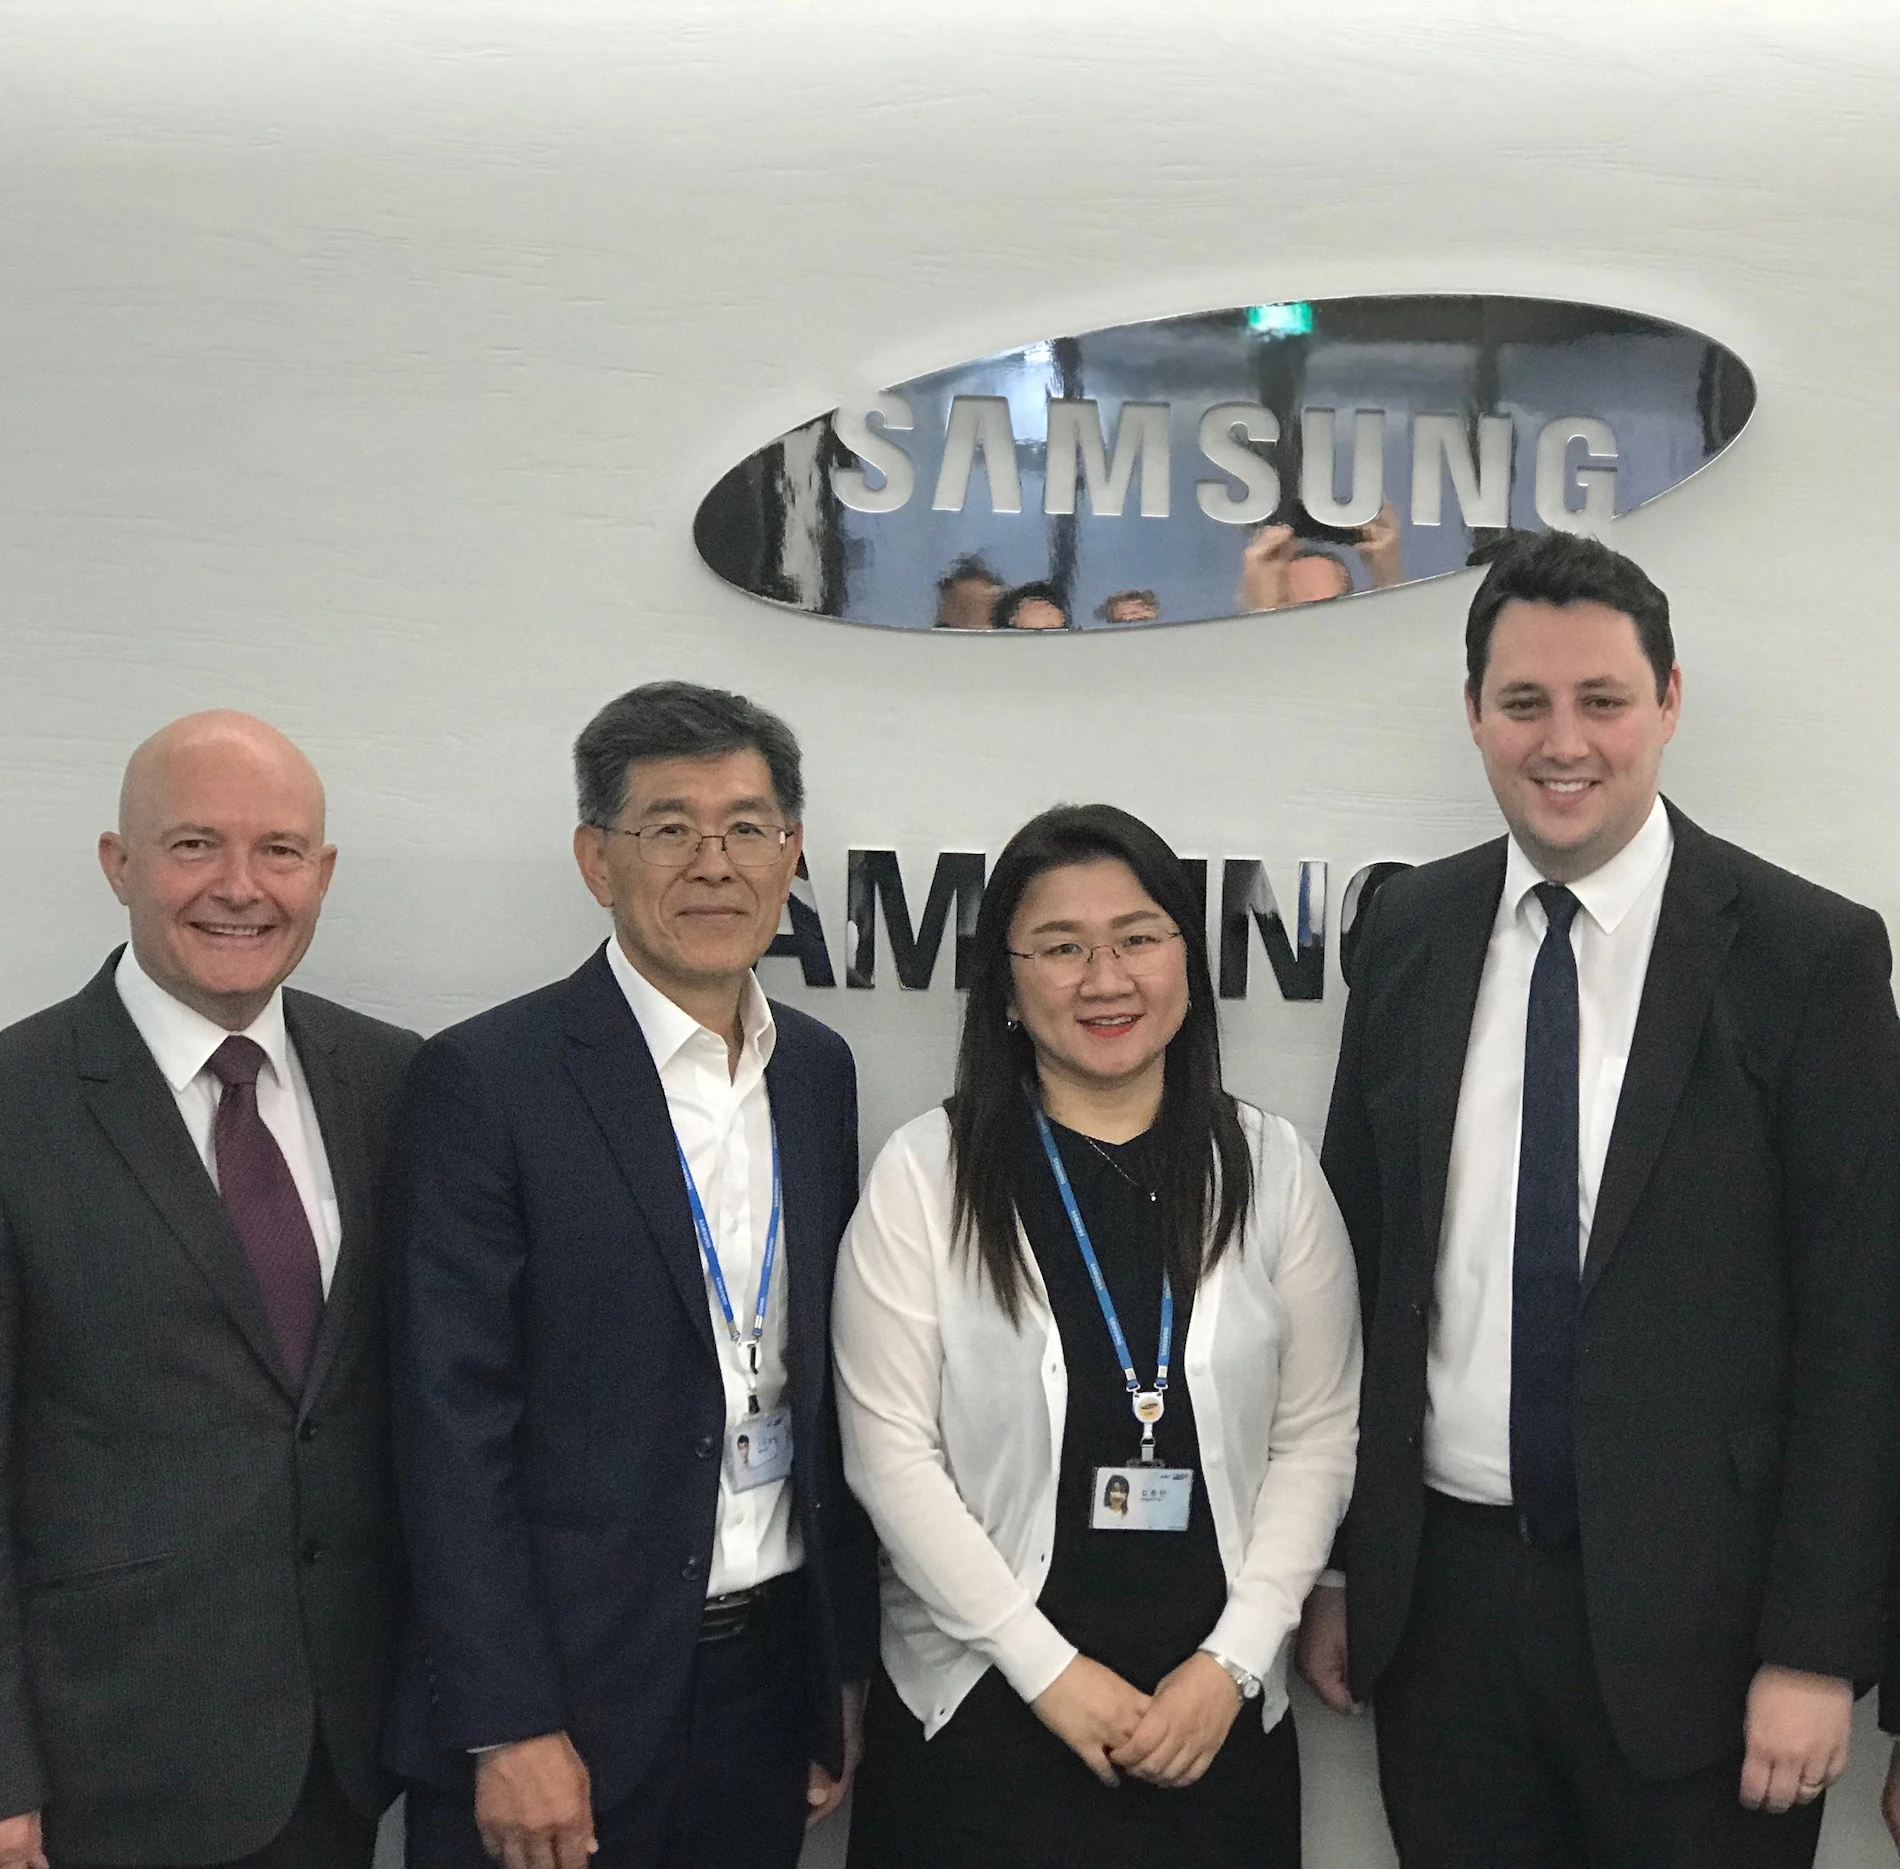  Tees Valley Combined Authority’s Business Director Neil Kenley, Samsung’s Plant ENG Team Advisor Steve Kim, Samsung’s Plant Sales Director Jordan Kim and Tees Valley Mayor Ben Houchen